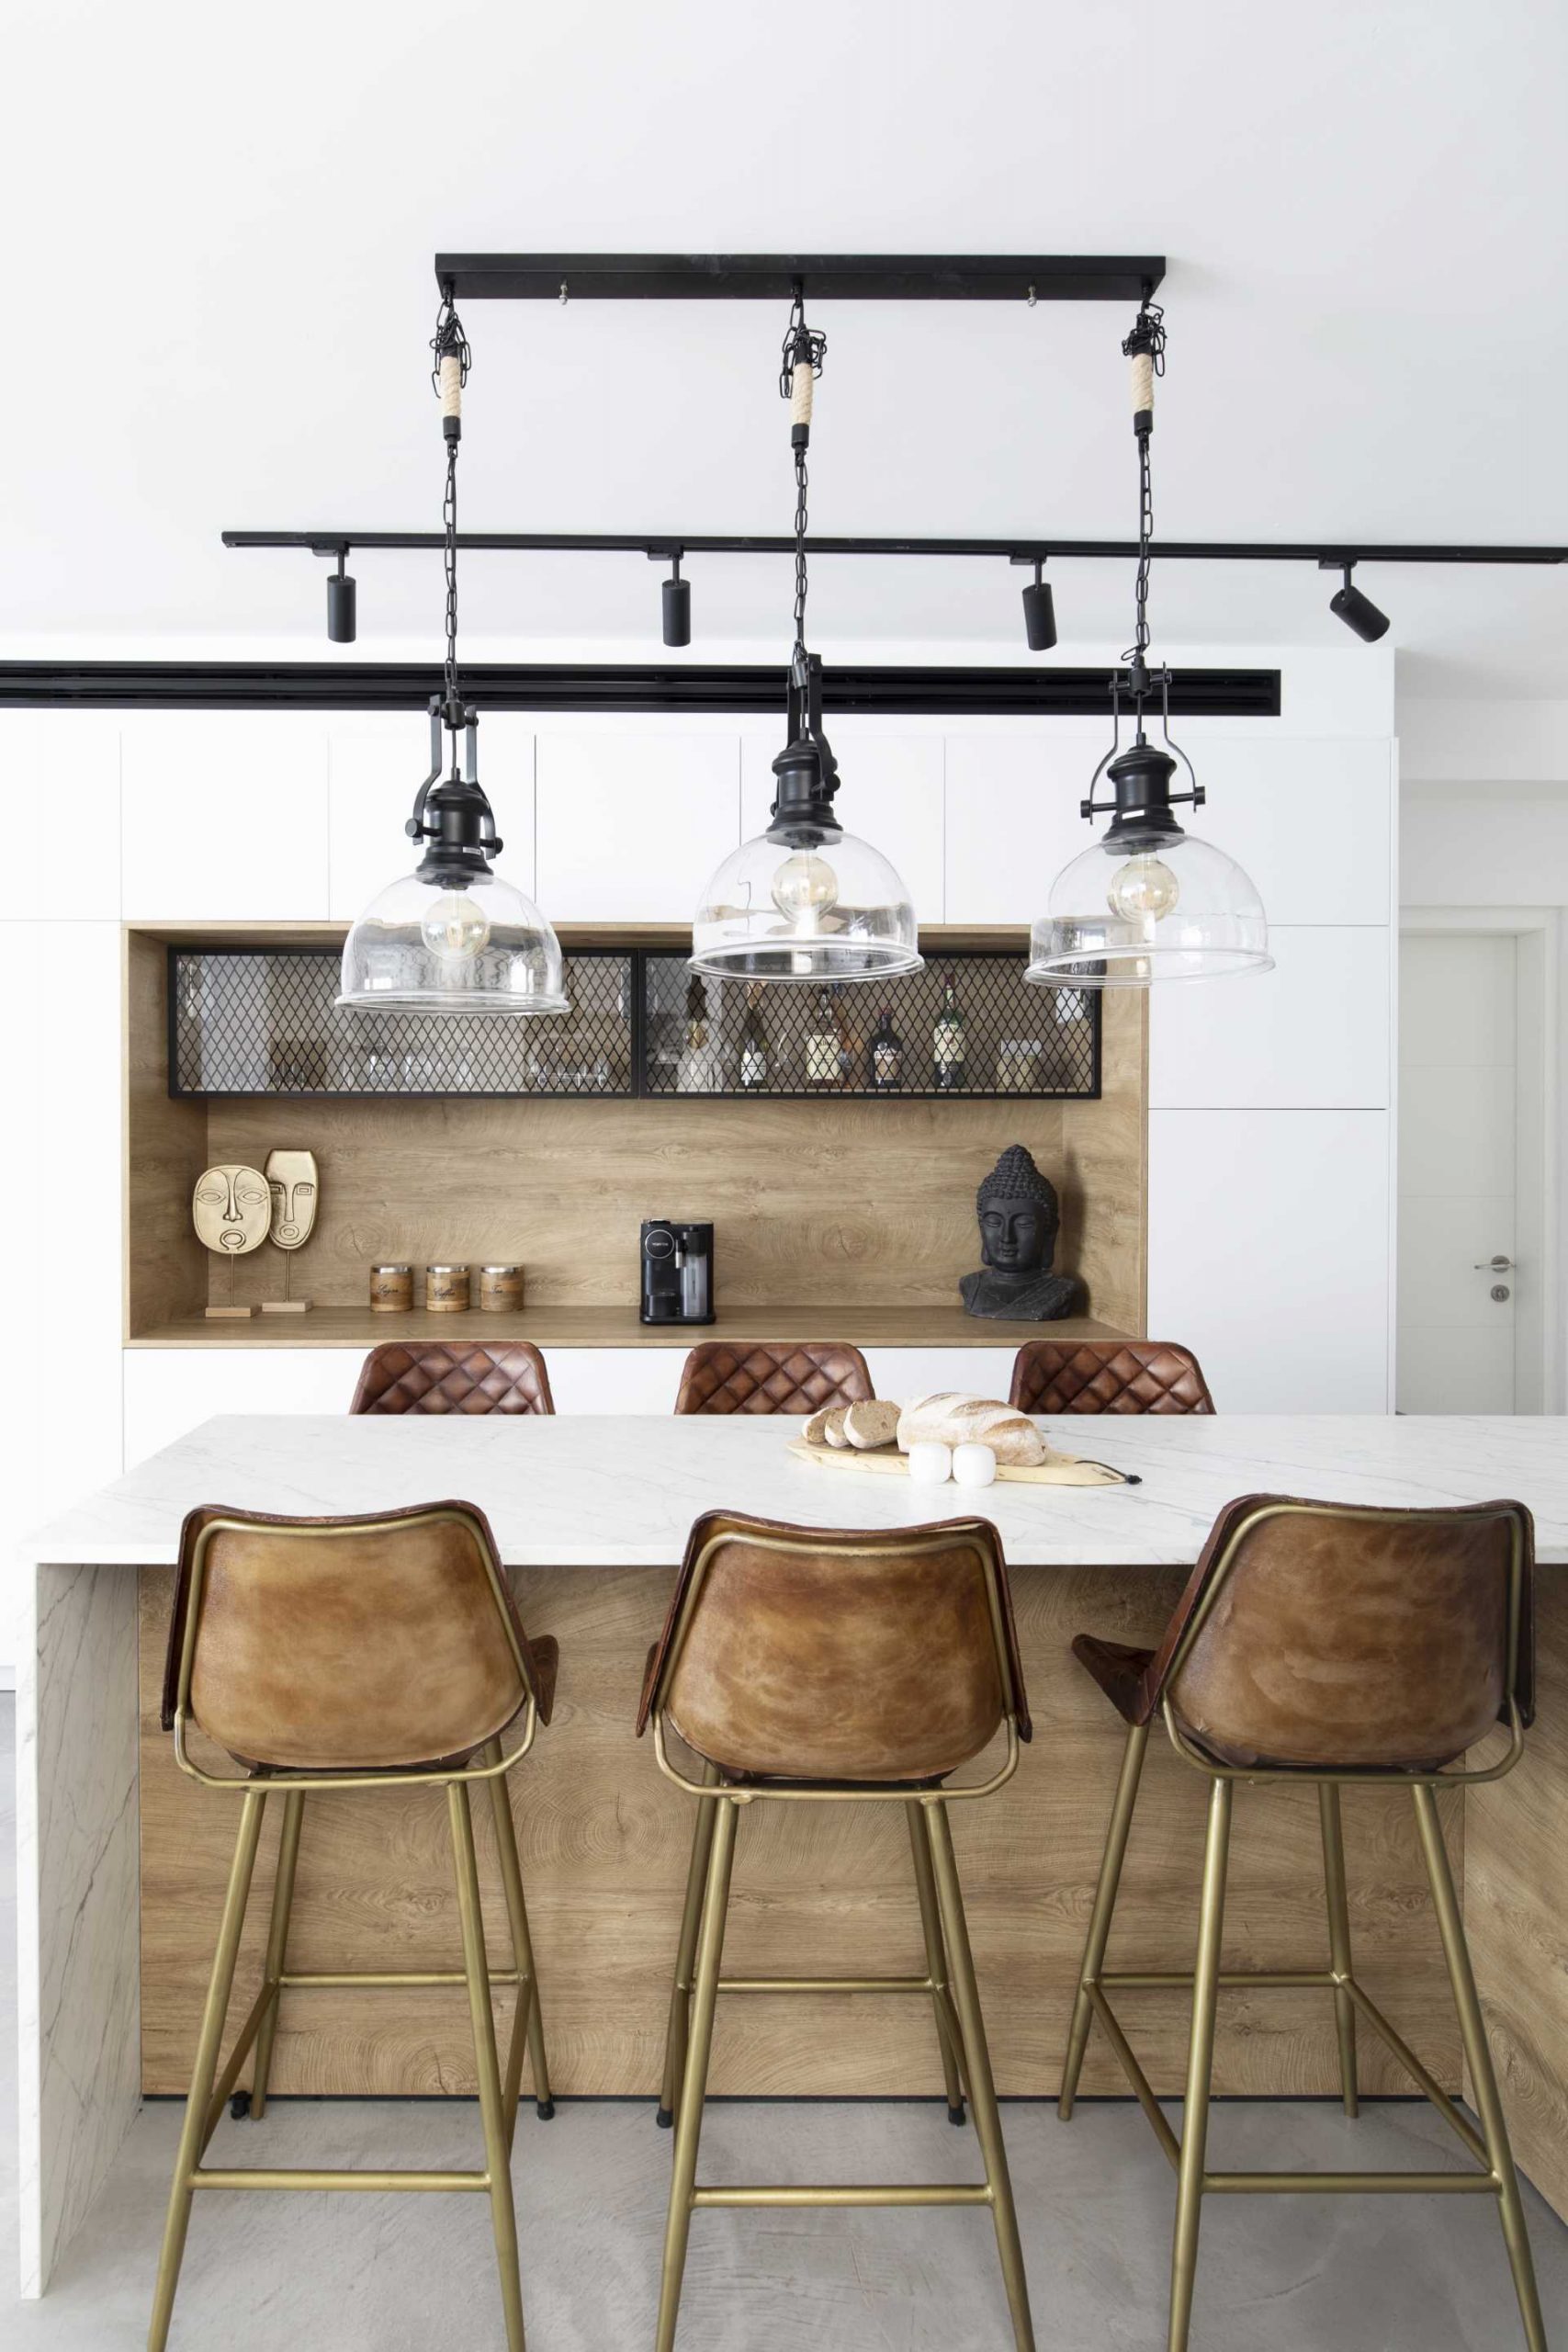 A modern kitchen with wood and matte black design elements, includes an island that double as a dining table.